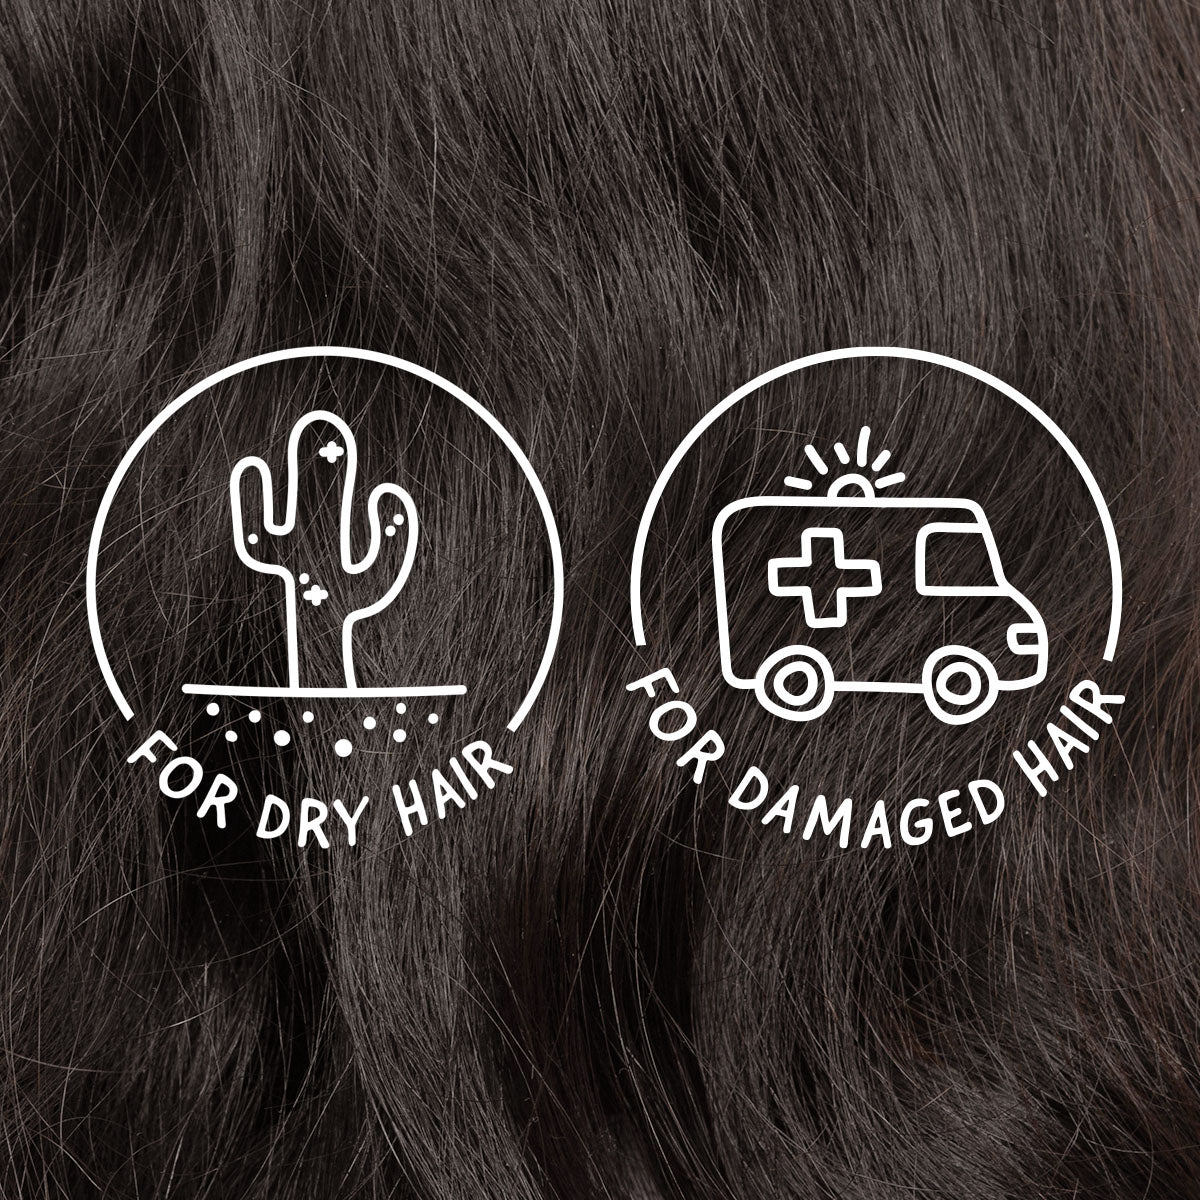 Restoring Hair Duo for Dry, Damaged Hair